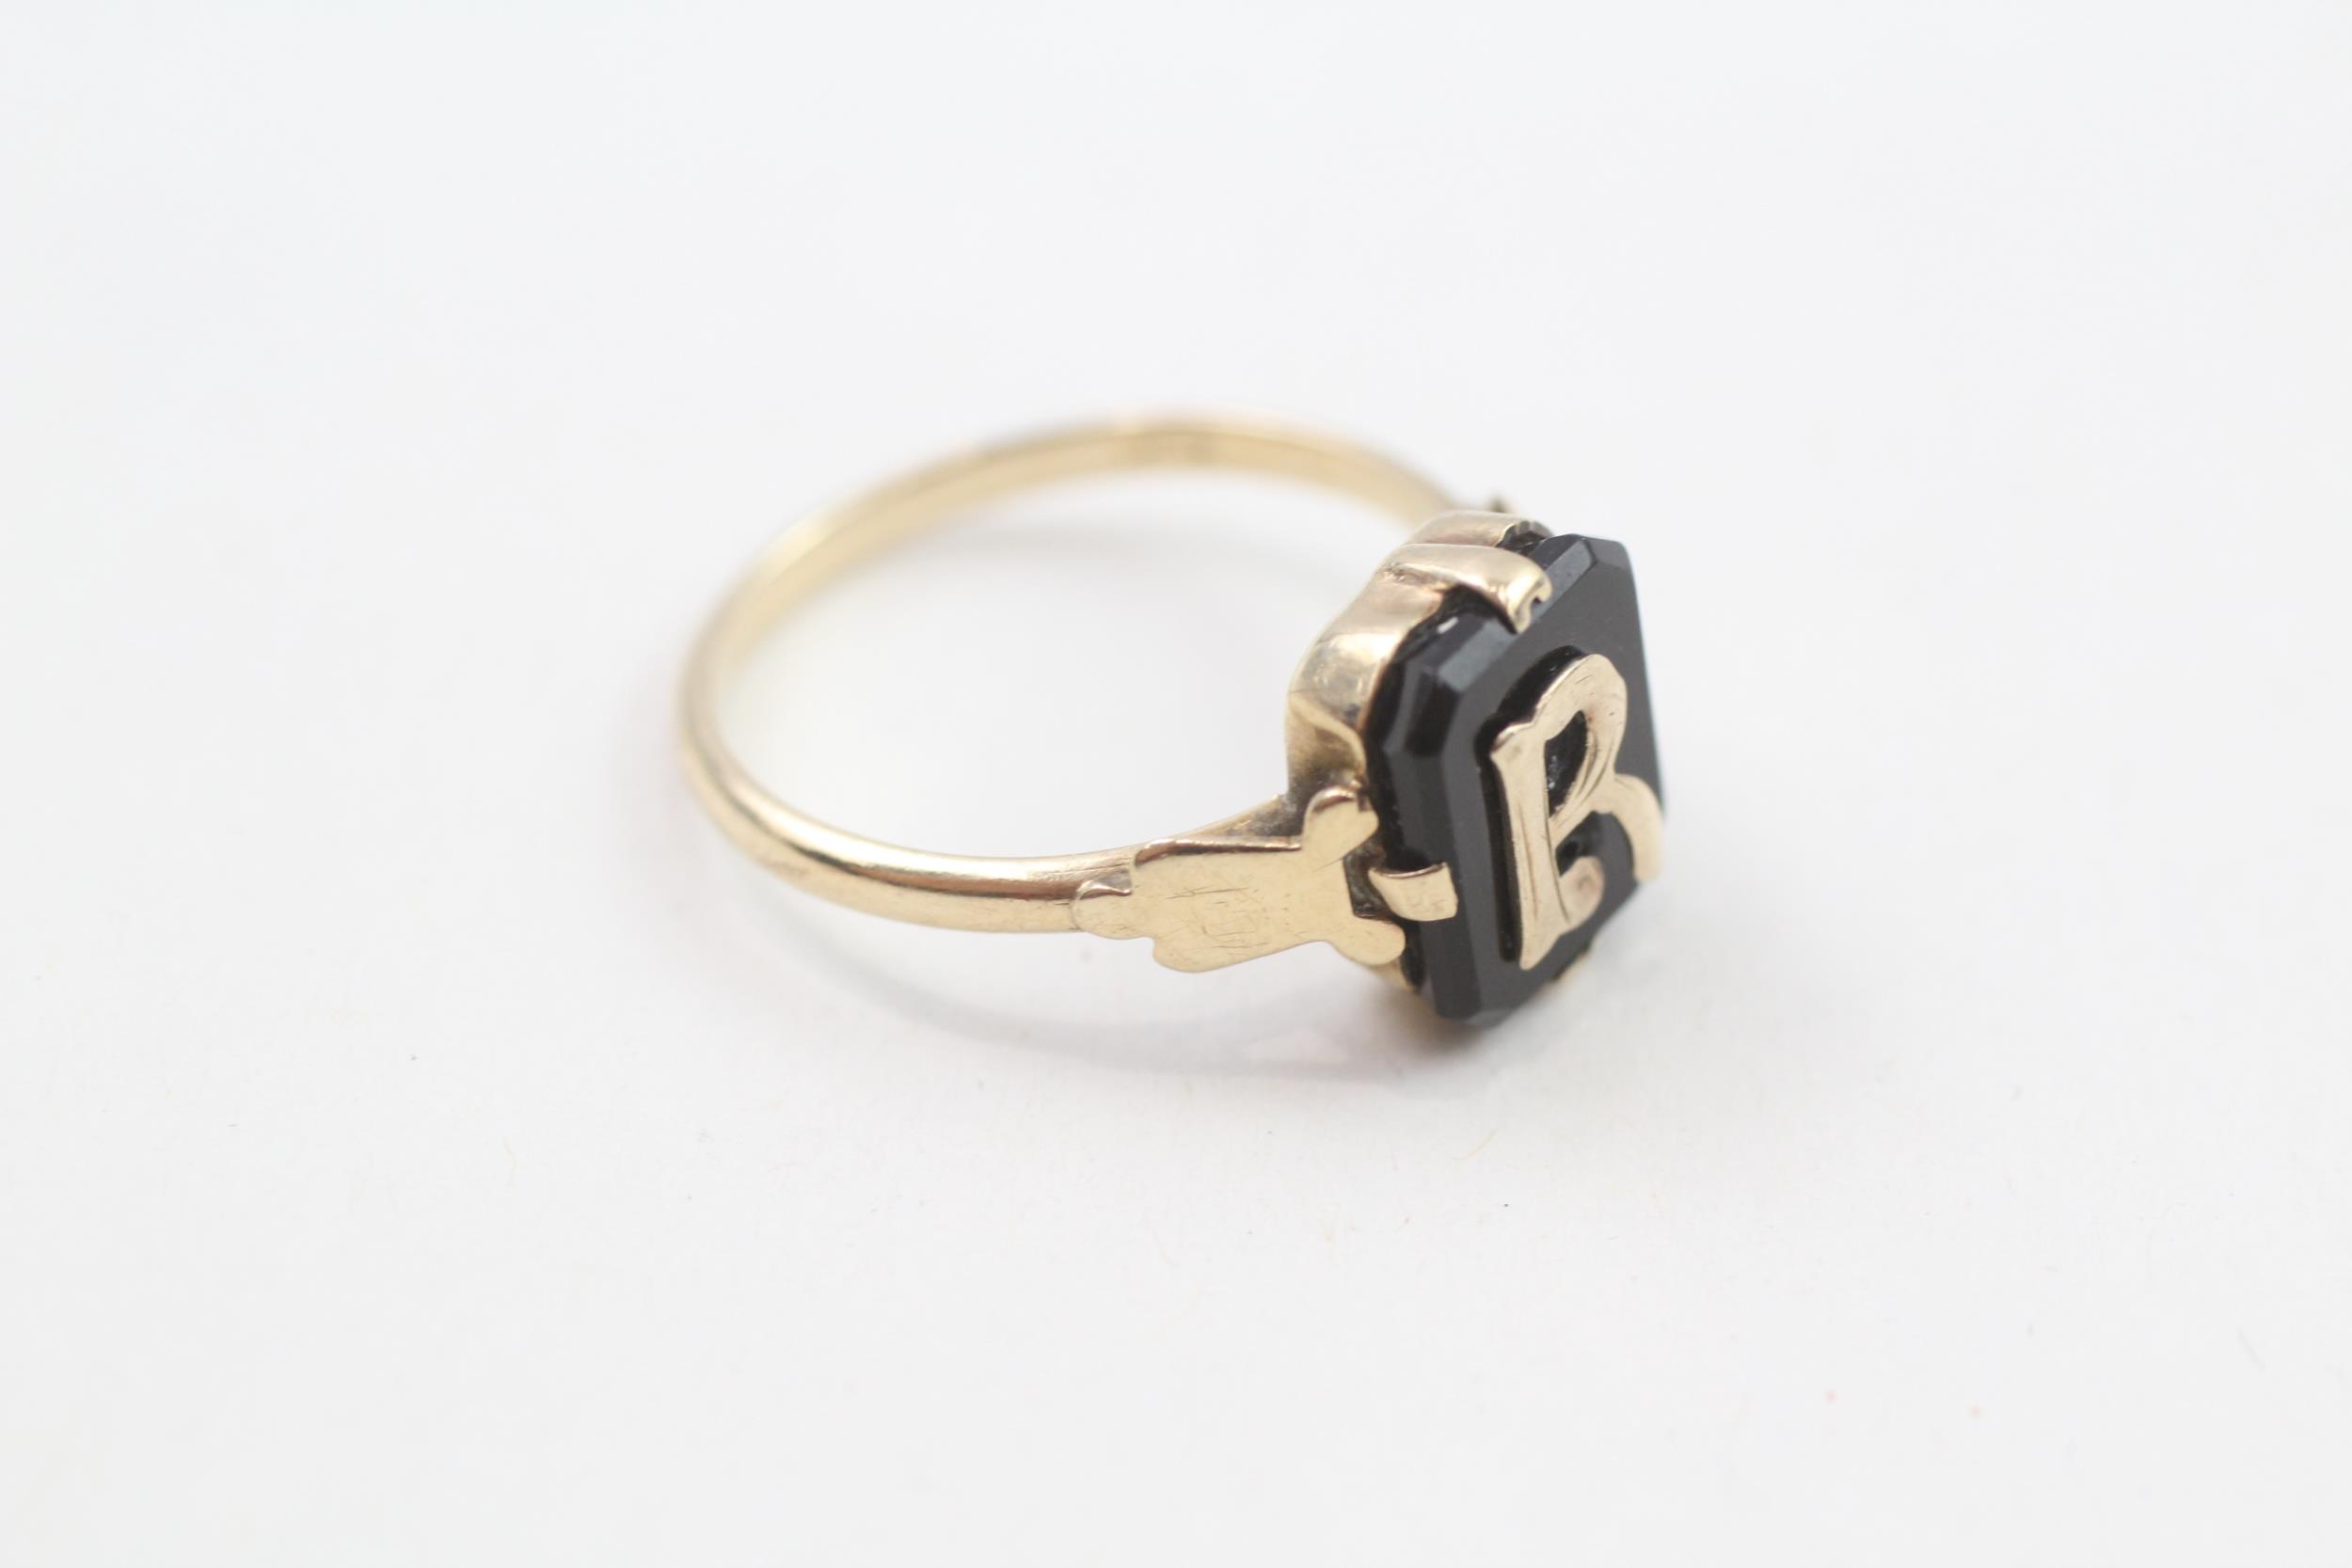 9ct gold vintage black onyx initial 'R' dress ring (1.9g) Size L - Image 4 of 5